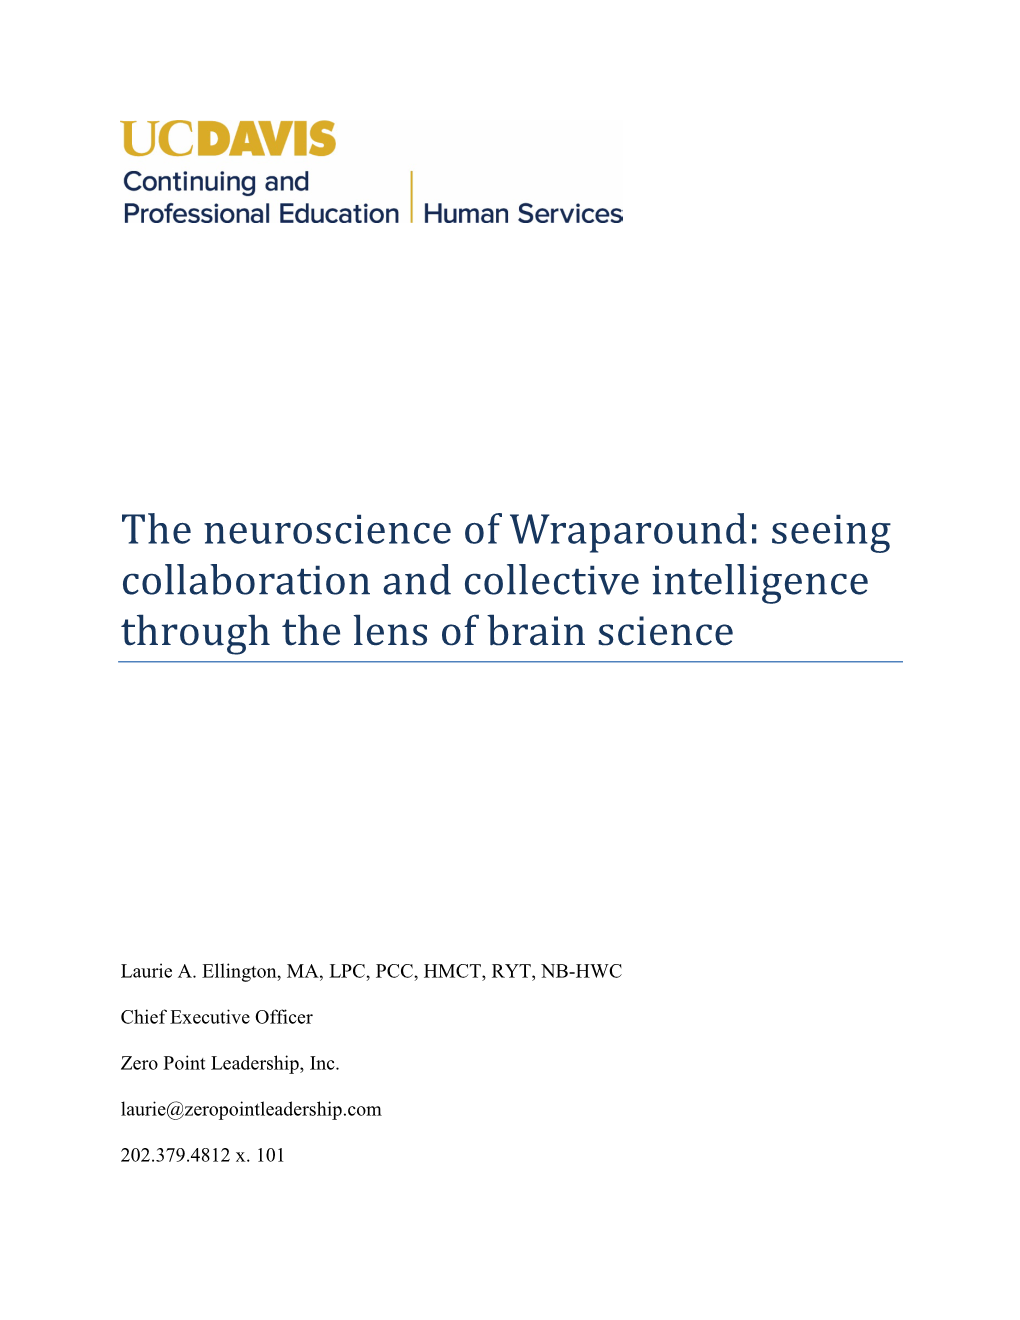 The Neuroscience of Wraparound: Seeing Collaboration and Collective Intelligence Through the Lens of Brain Science